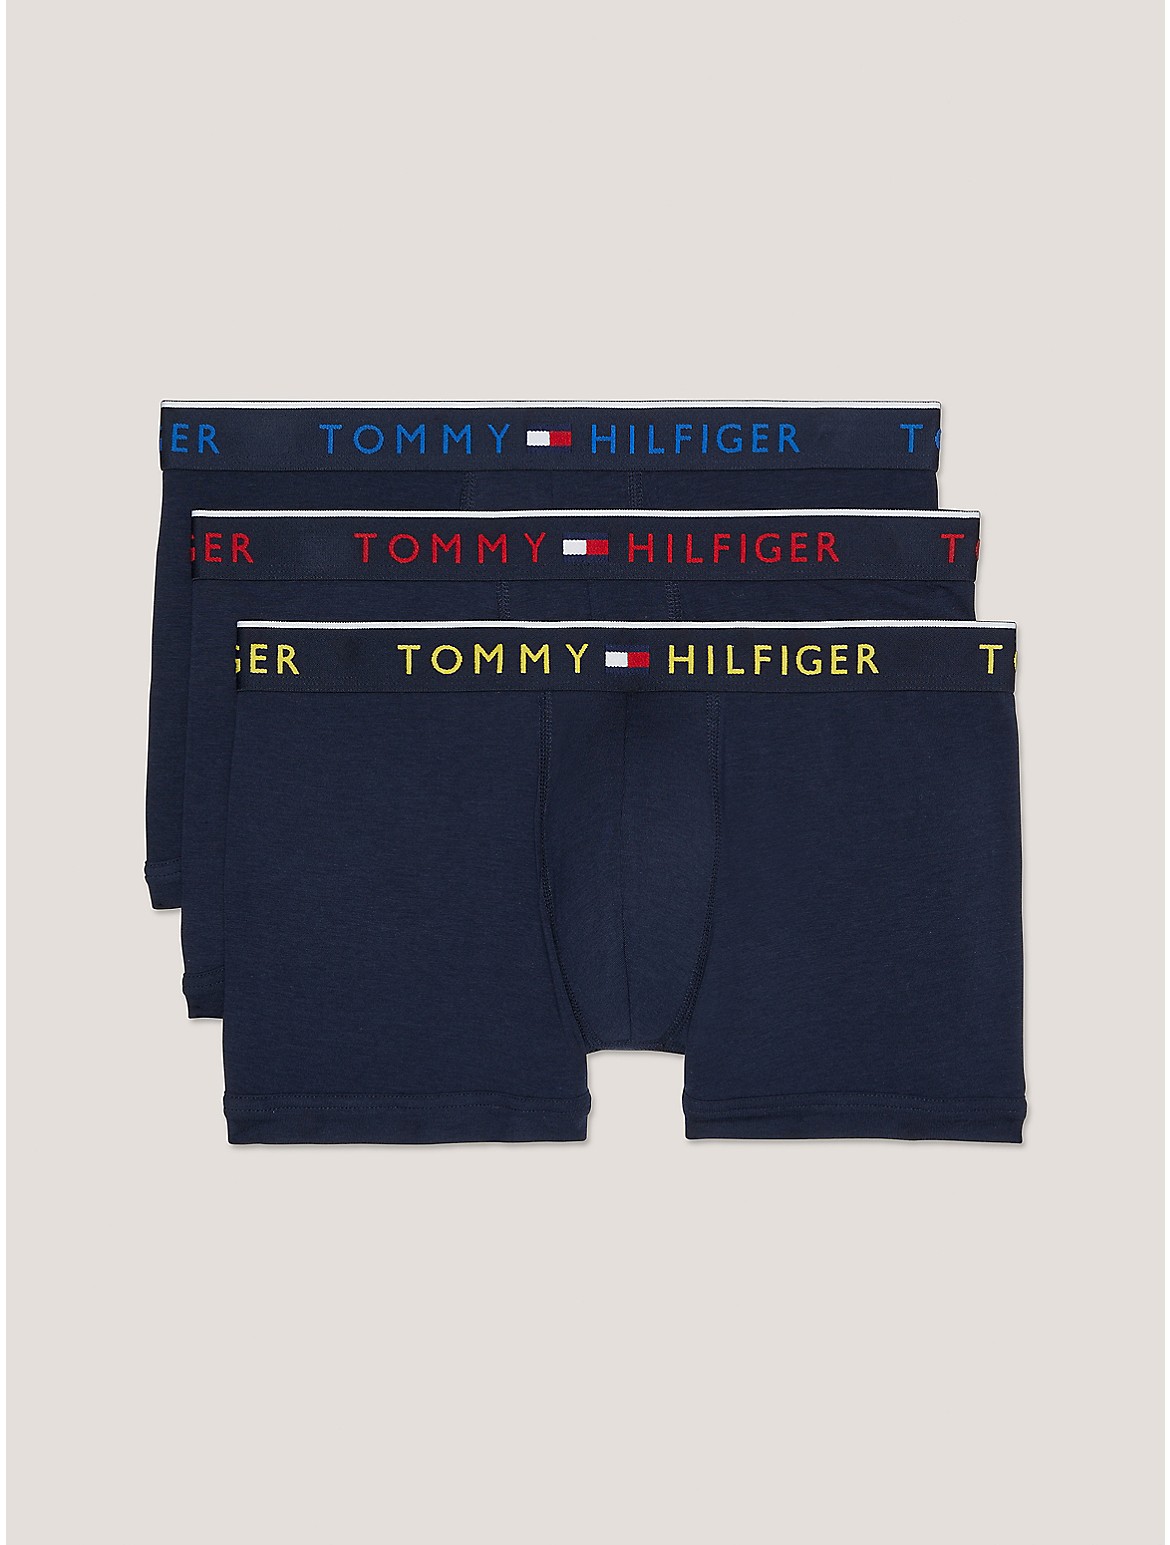 Tommy Hilfiger Men's Essential Luxe Stretch Trunk 3-Pack